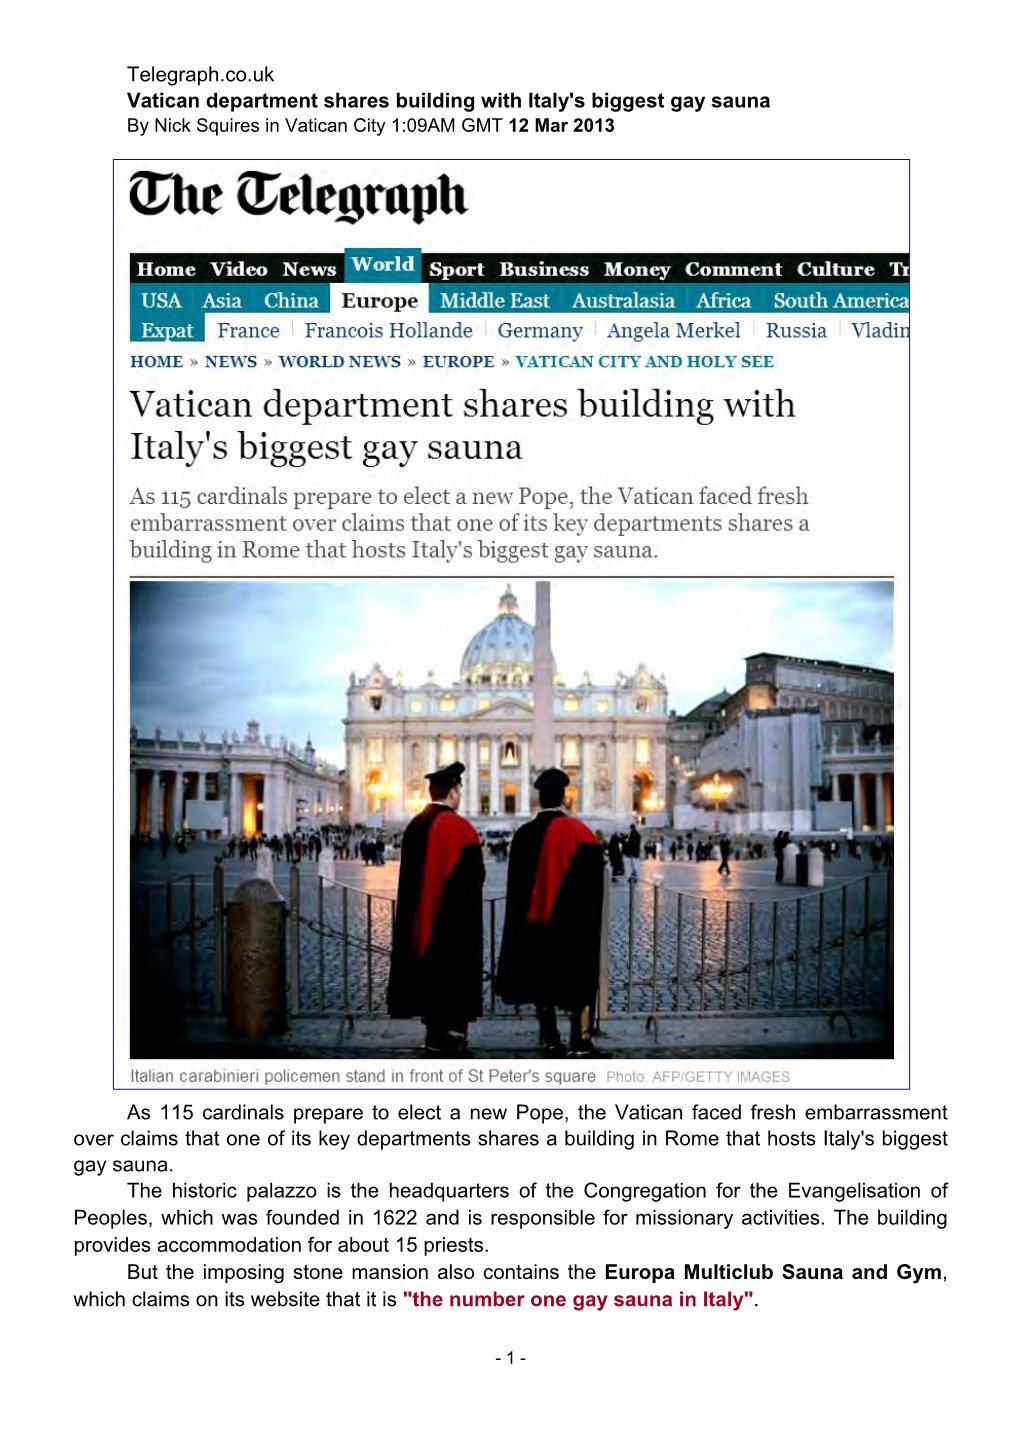 Vatican Department Shares Building with Italy's Biggest Gay Sauna by Nick Squires in Vatican City 1:09AM GMT 12 Mar 2013